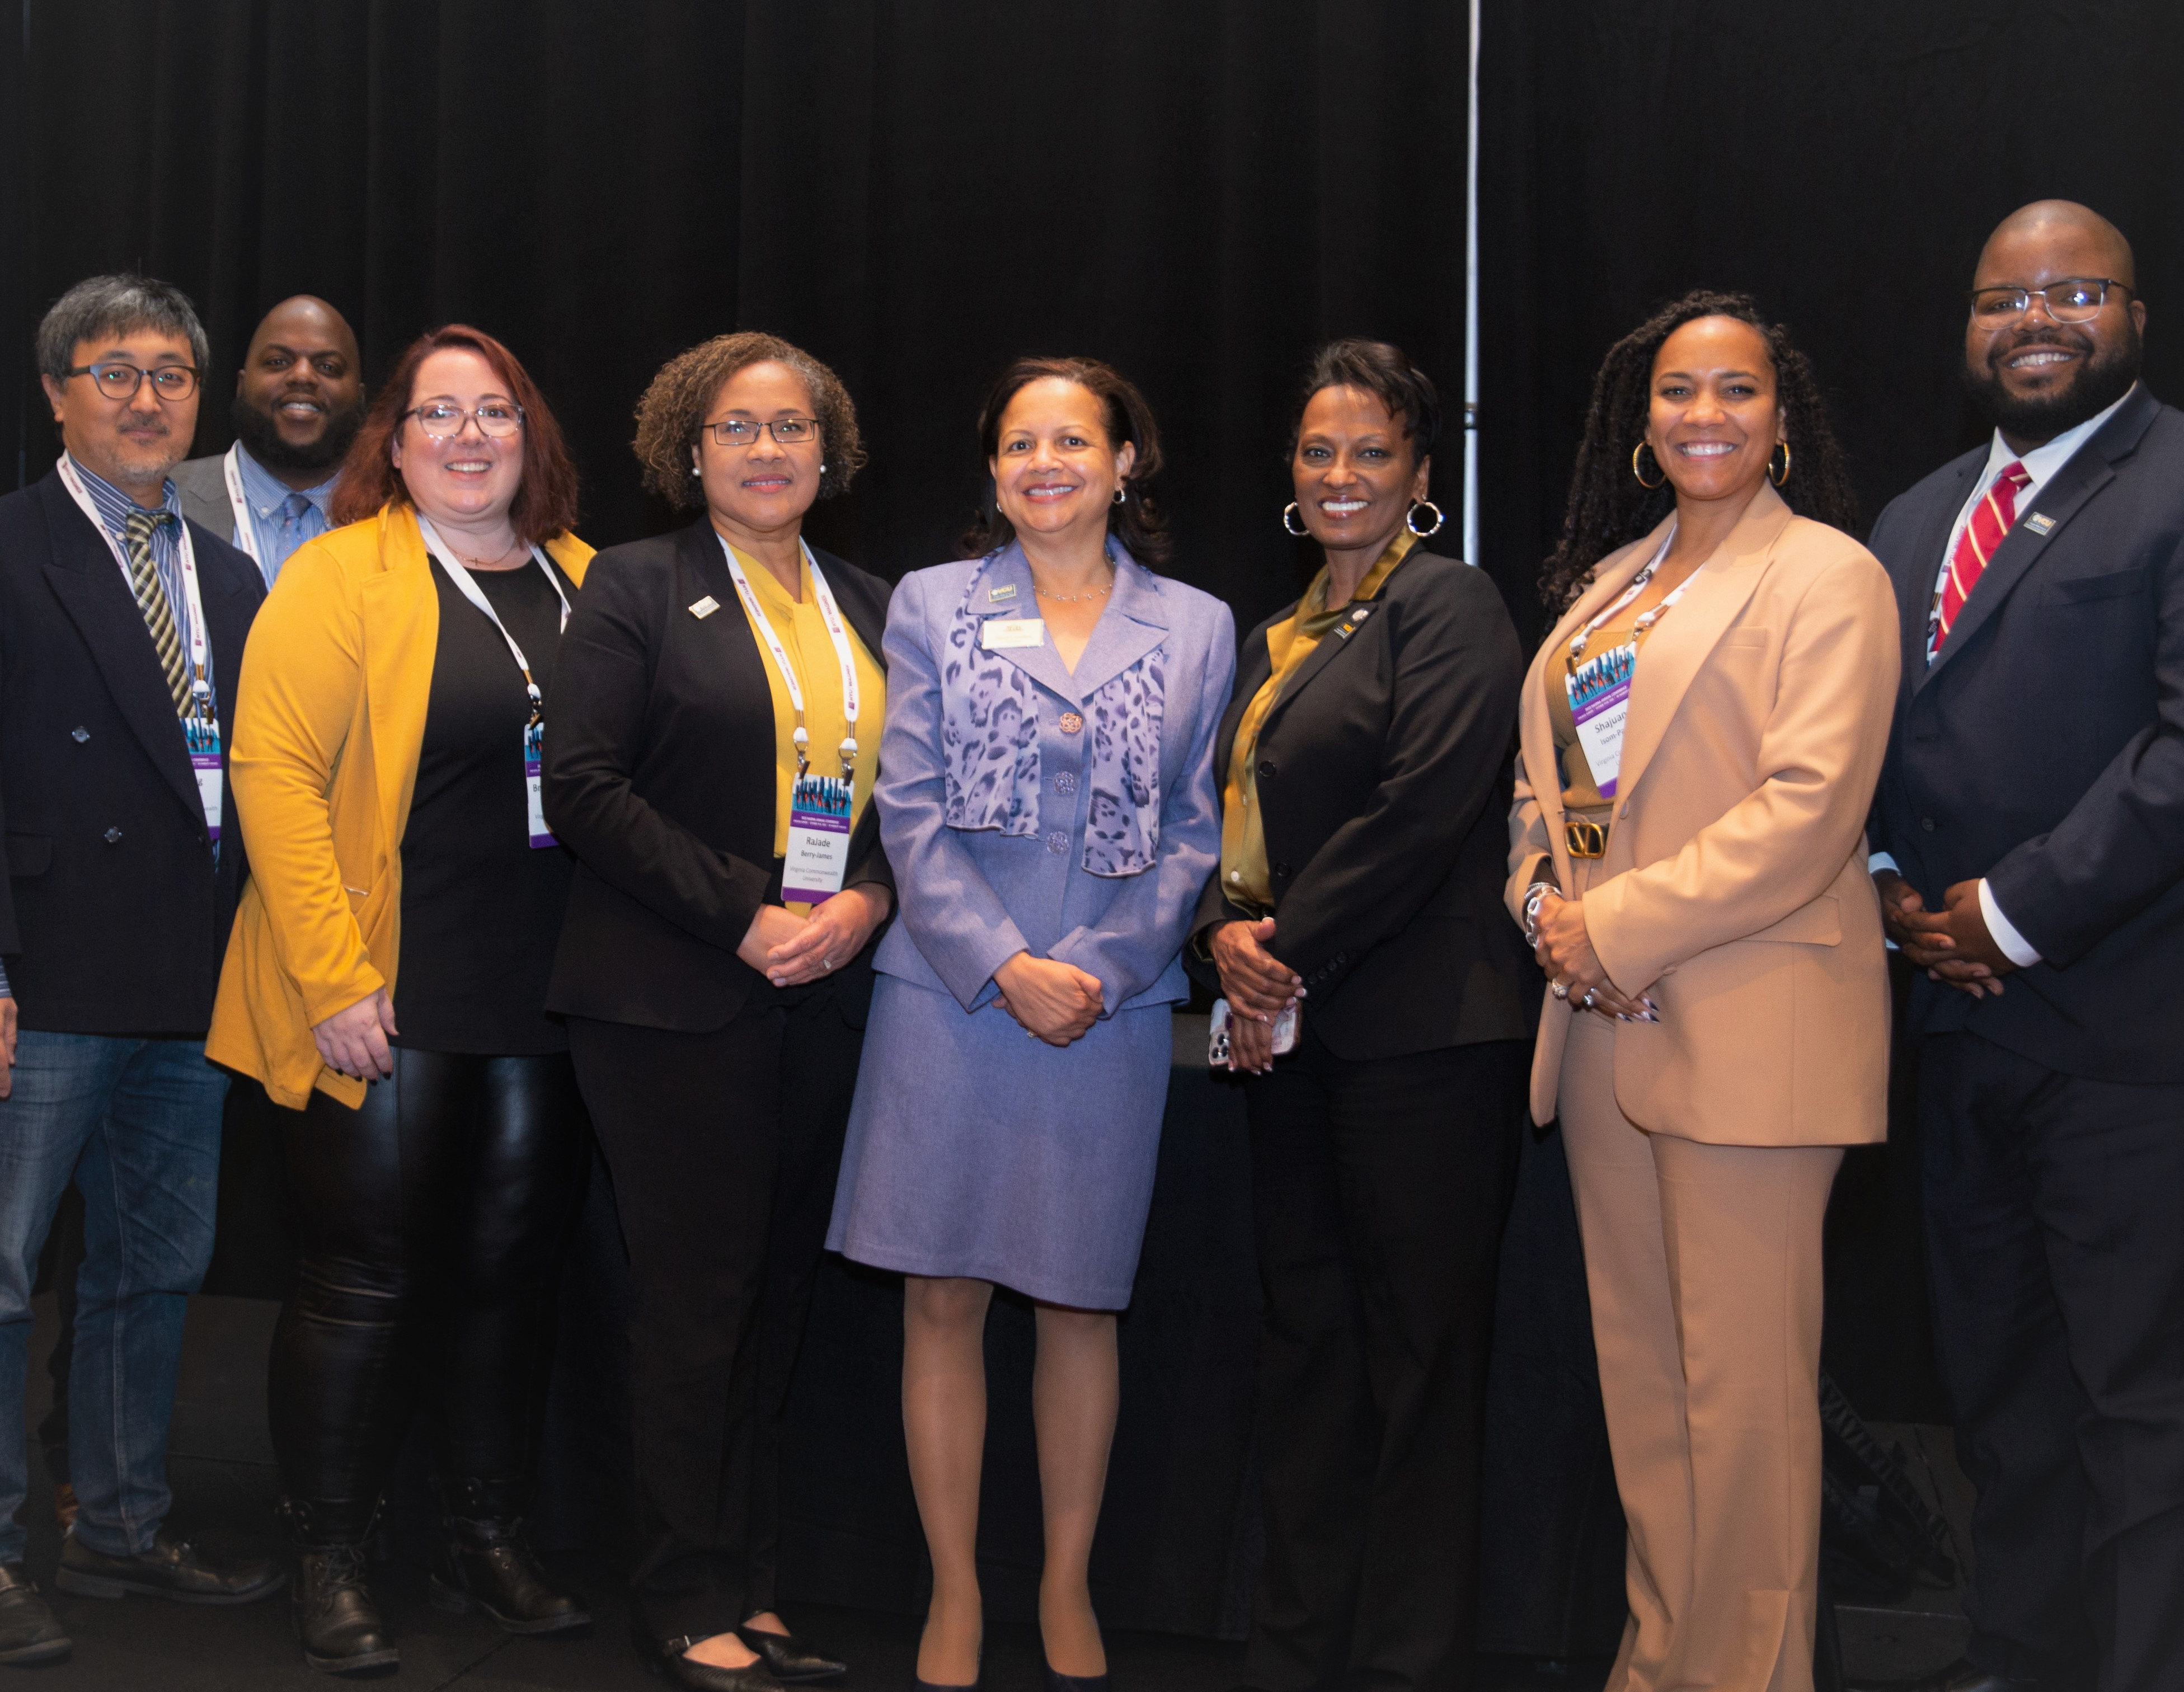 The Wilder School was well-represented at NASPAA. From left to right: Myung Jin, Curtis Brown, Brie Haupt, RaJade Berry-James, Susan Gooden, Dietra Trent and Shajuana Isom-Payne